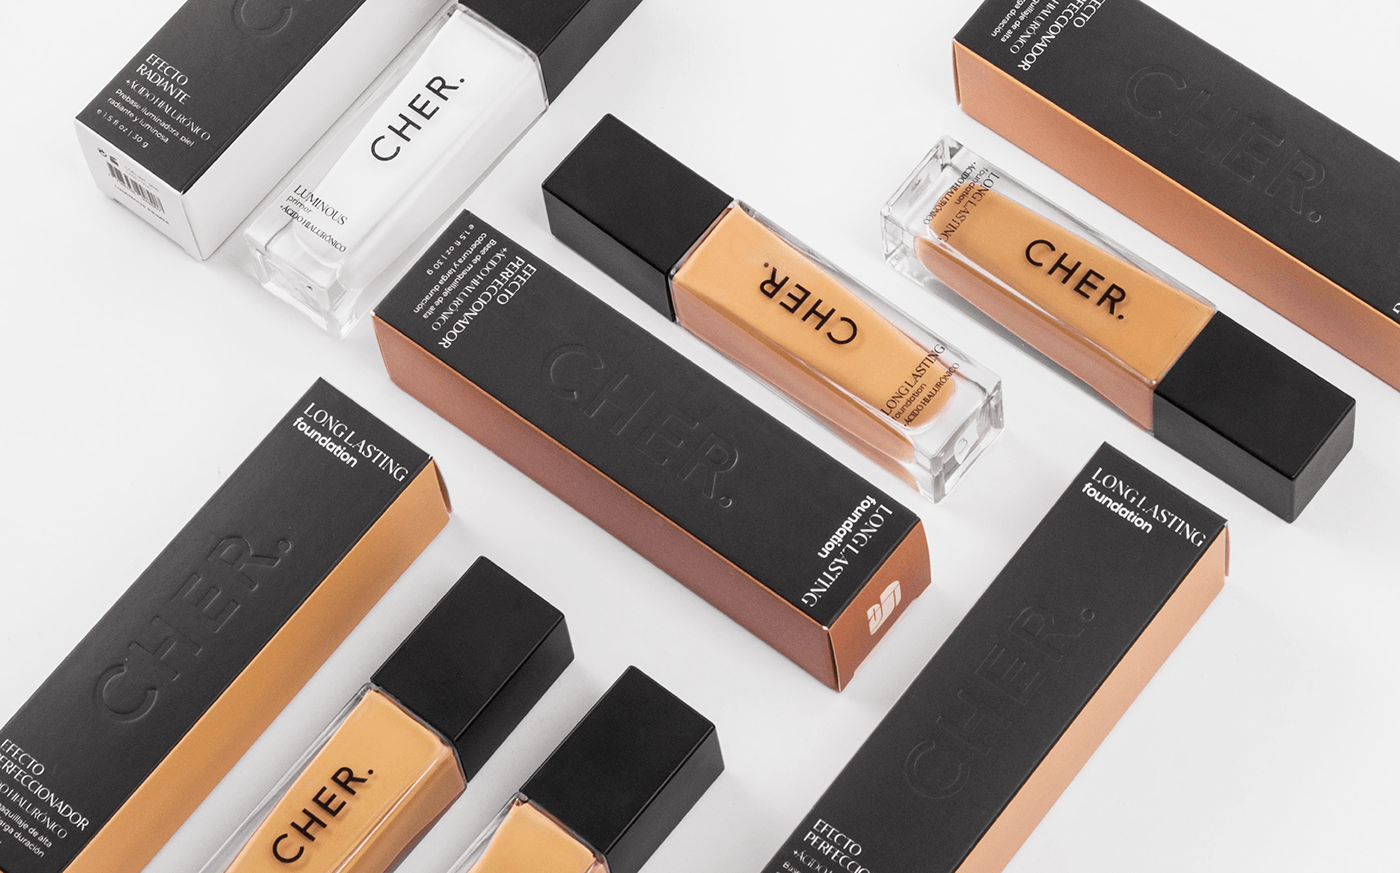 Packaging and labels for foundation with embossed logo, minimal typographic design and color tone